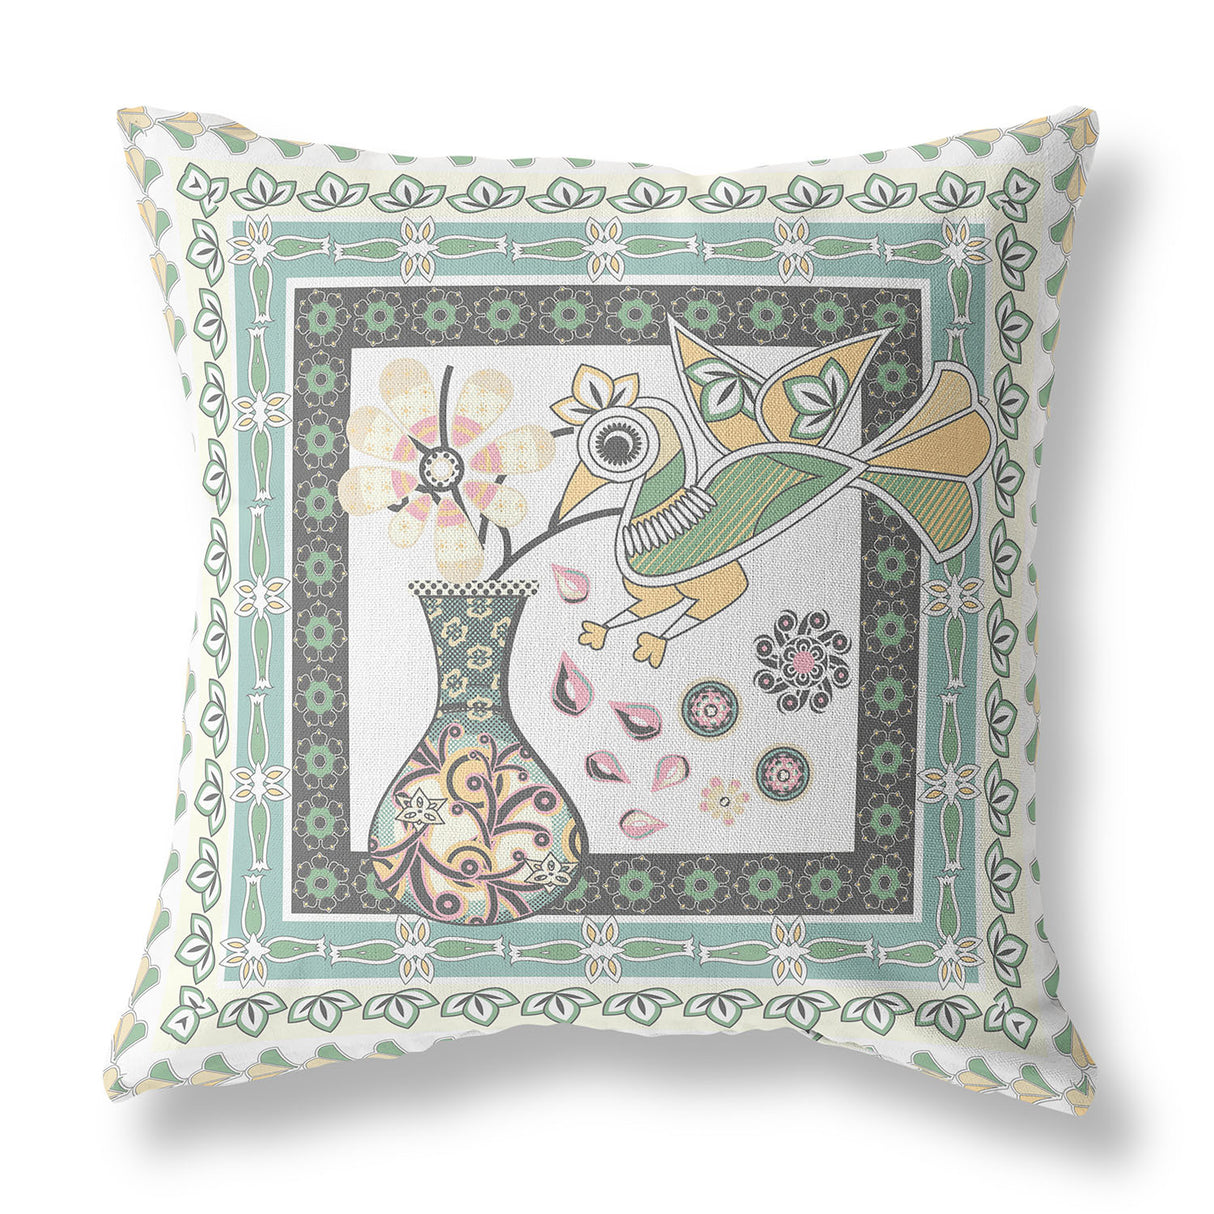 16" x 16" Green and White Bird Blown Seam Abstract Indoor Outdoor Throw Pillow